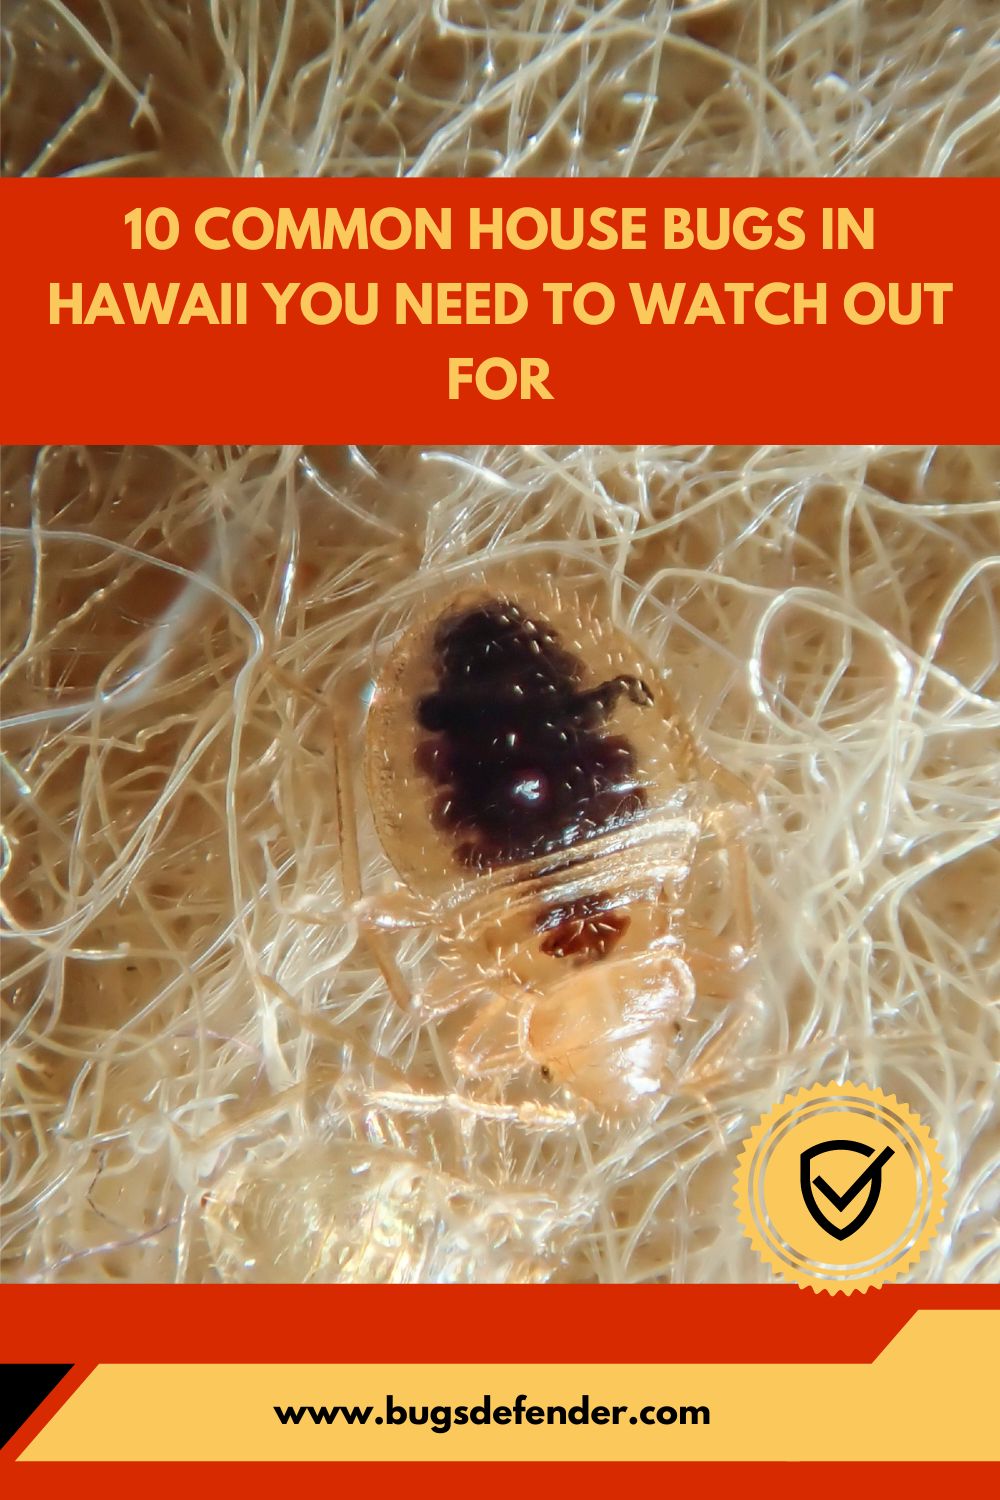 10 Common House Bugs In Hawaii You Need To Watch Out For pin2